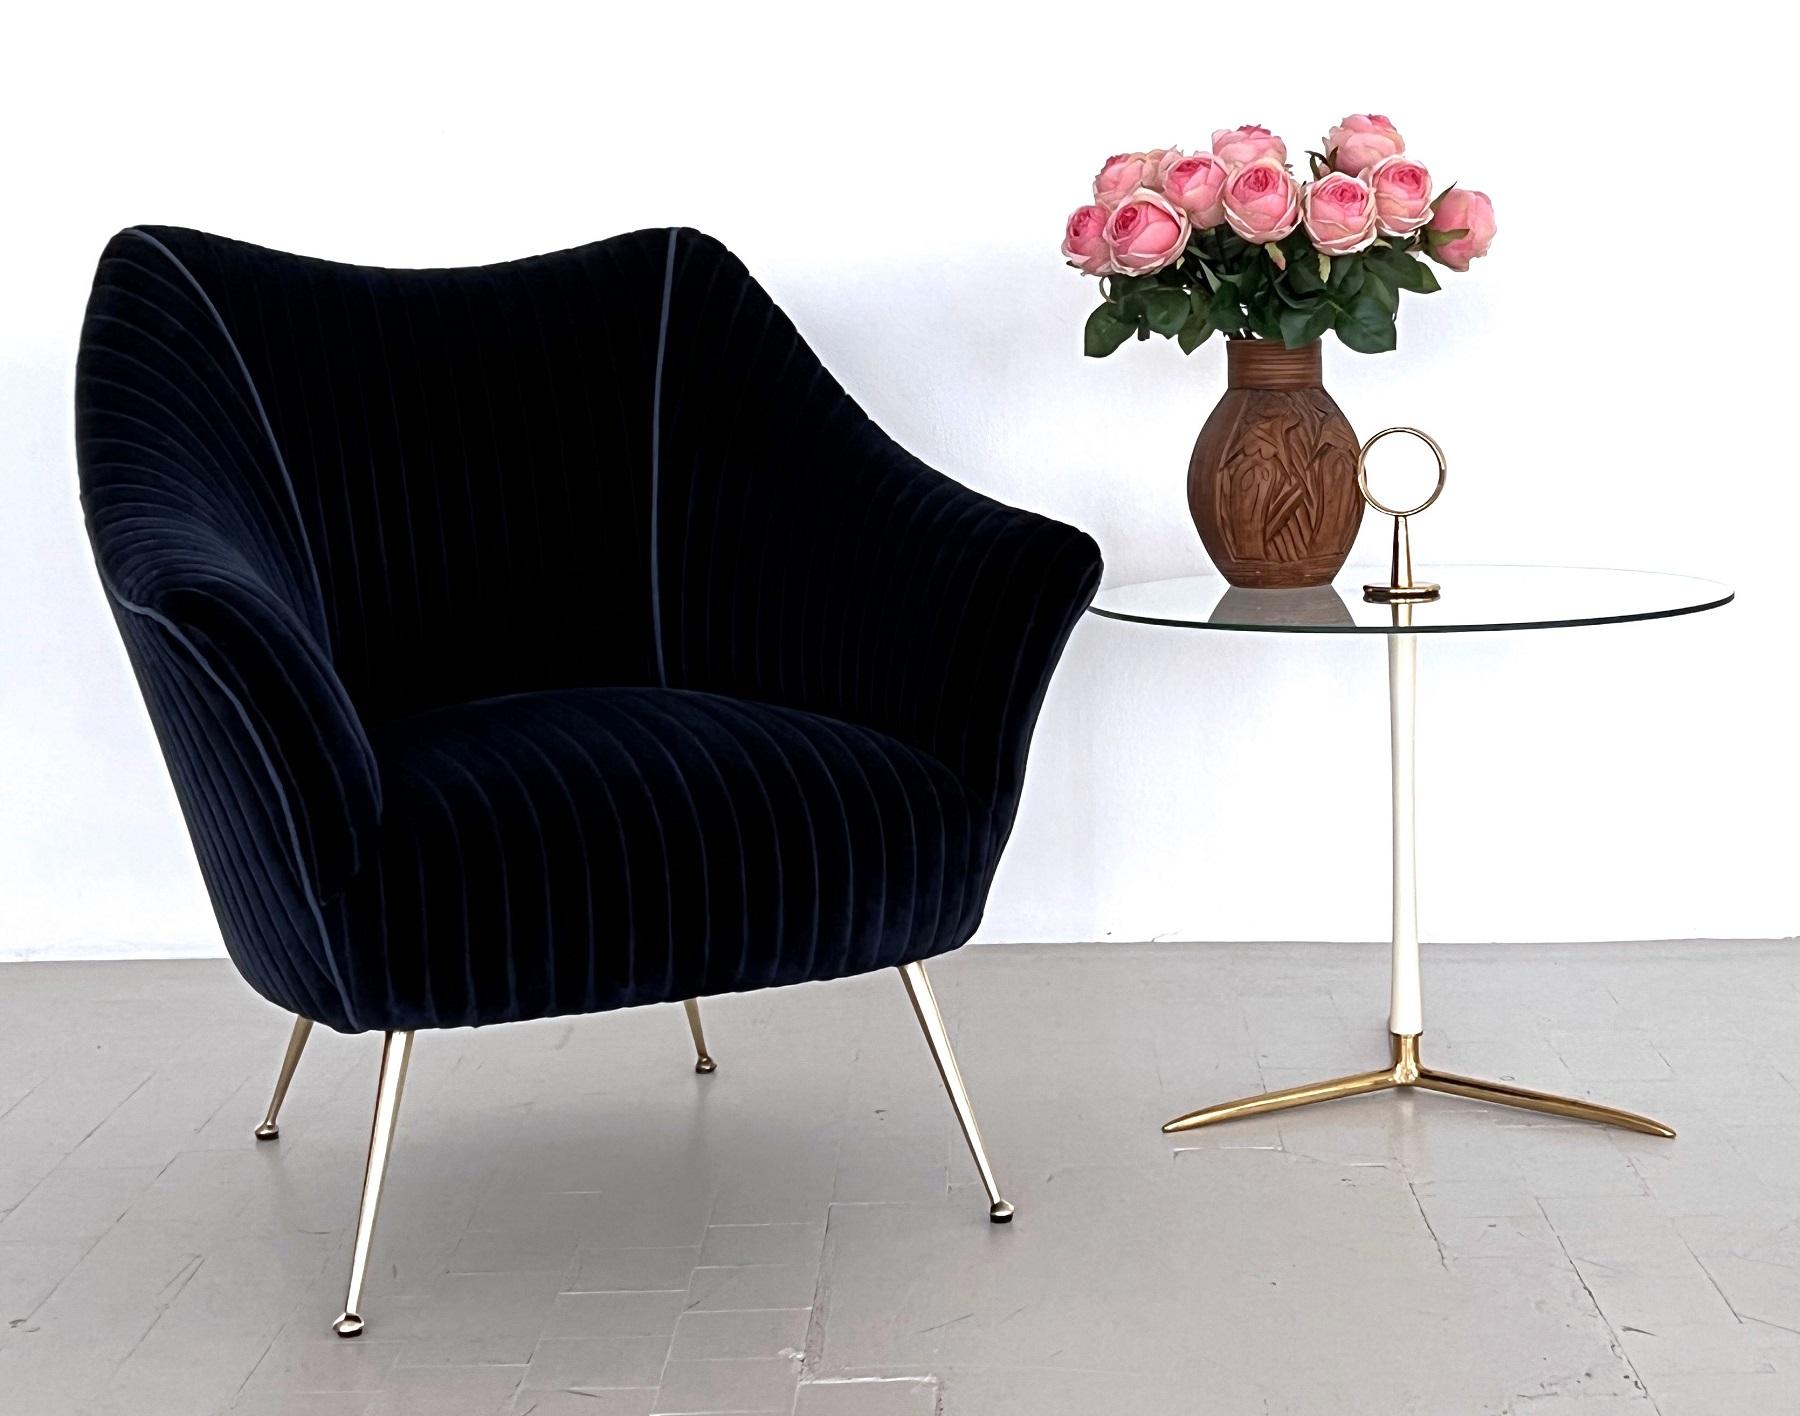 Magnificent comfortable single armchair re-upholstered in gorgeous, very thick and soft night-blue velvet. The velvet has a large striped design, which is felt by touch.
The original armchair is from the 1950s, and re-upholstered from scratch with